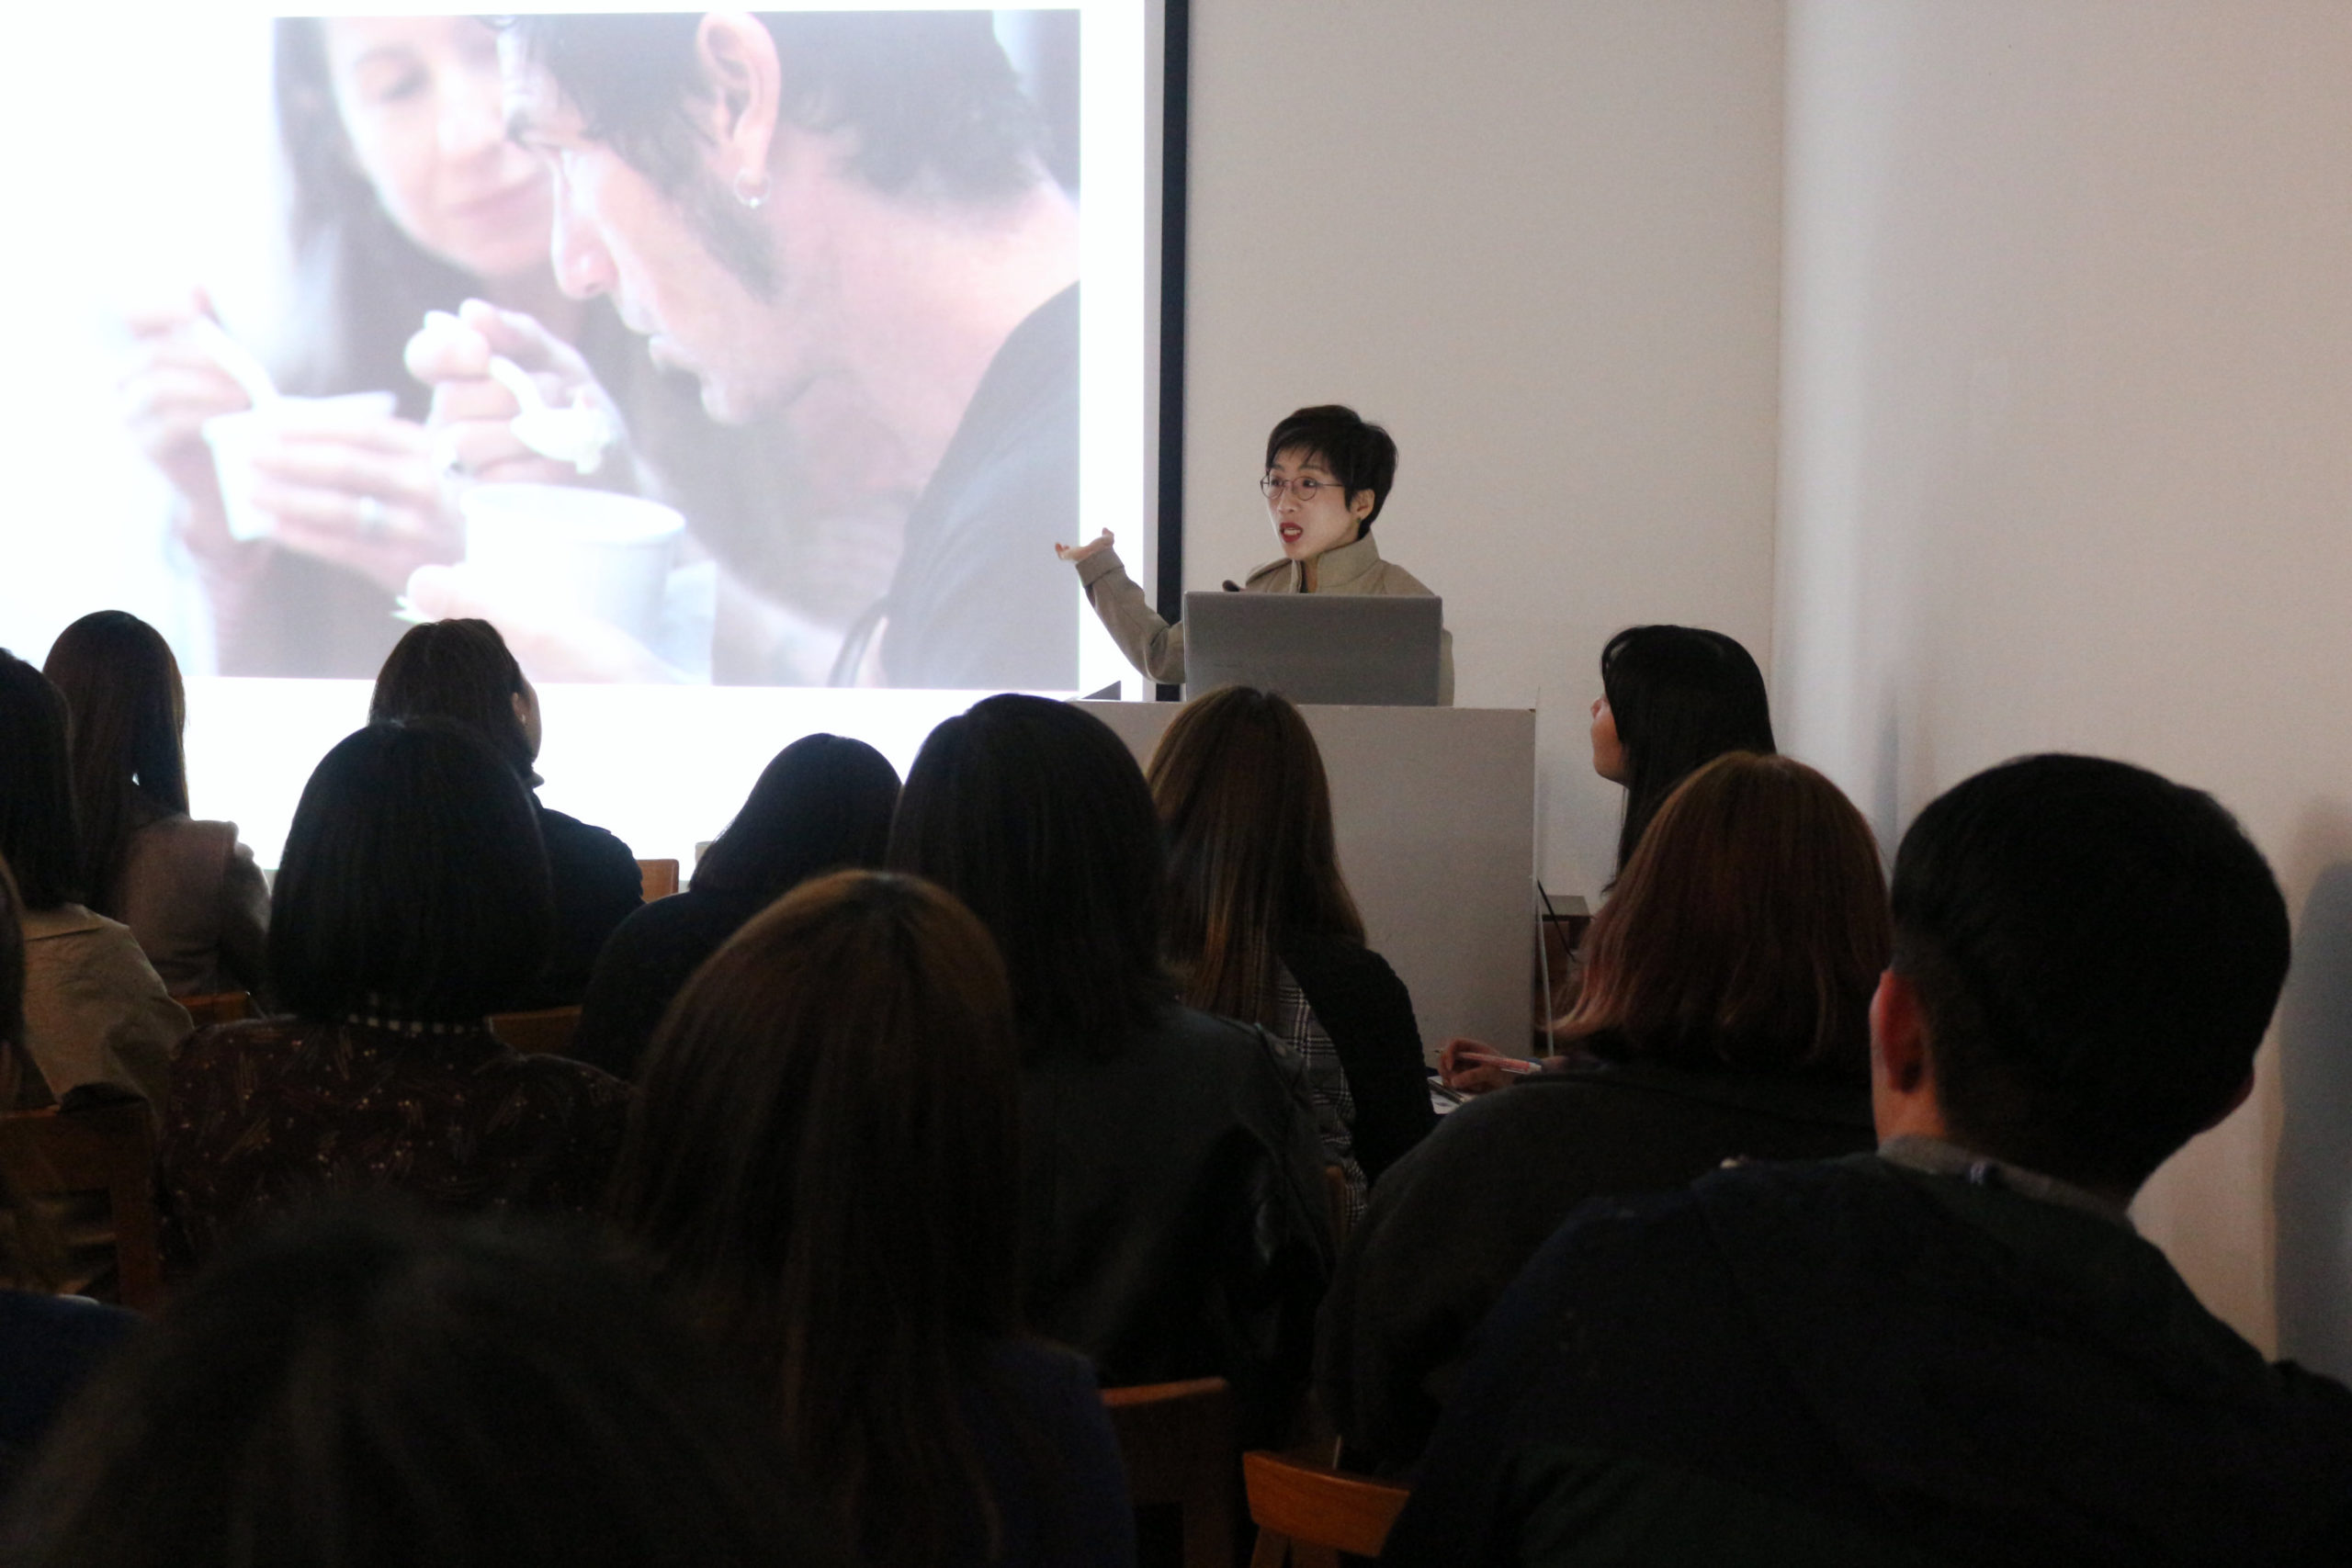 Kang Sumi – The Heterotopia of the Relationship - Contemporary art and Performativity talk, Total Museum of Contemporary Art, Seoul, South Korea